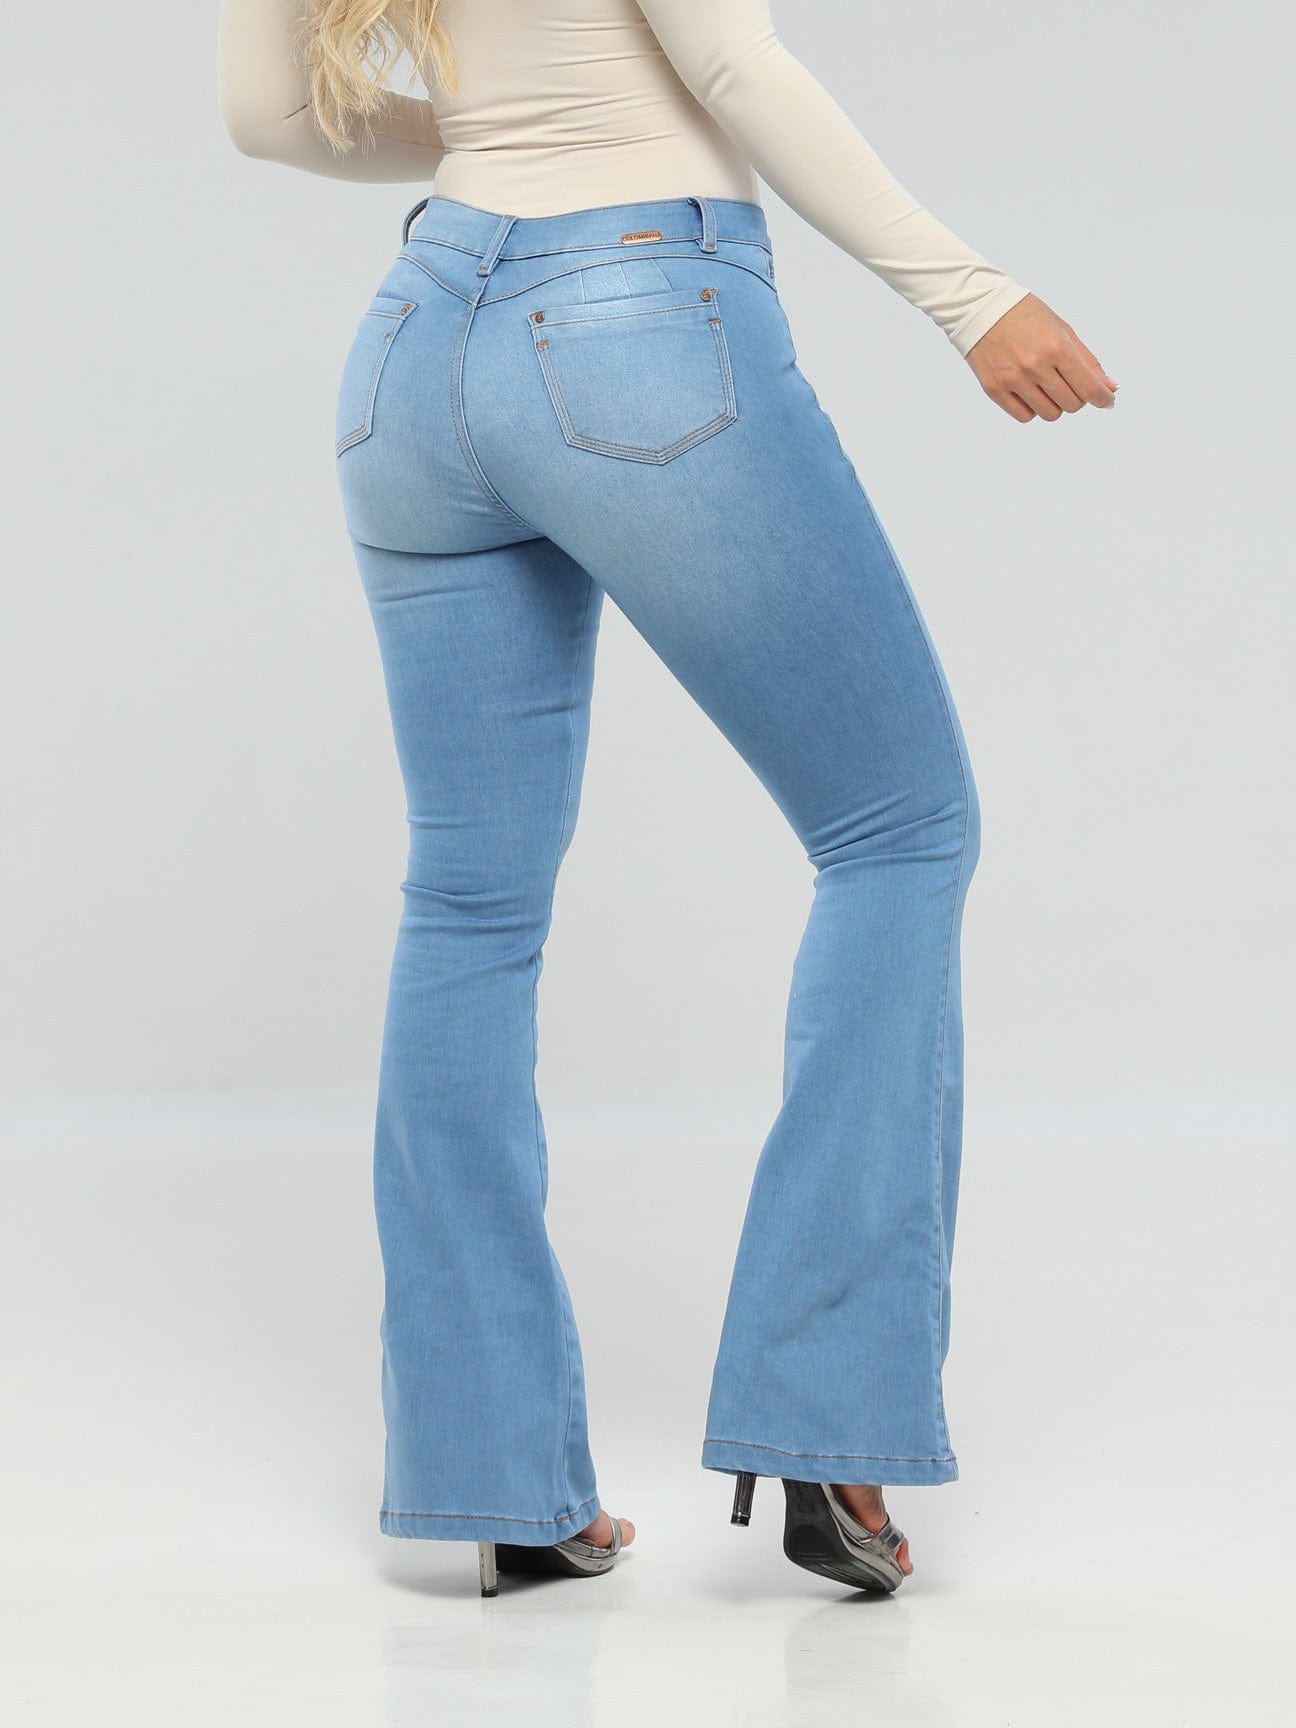 JEANS COLOMBIANOS F1278 Authentic Colombian Push Up Jeans, Jean